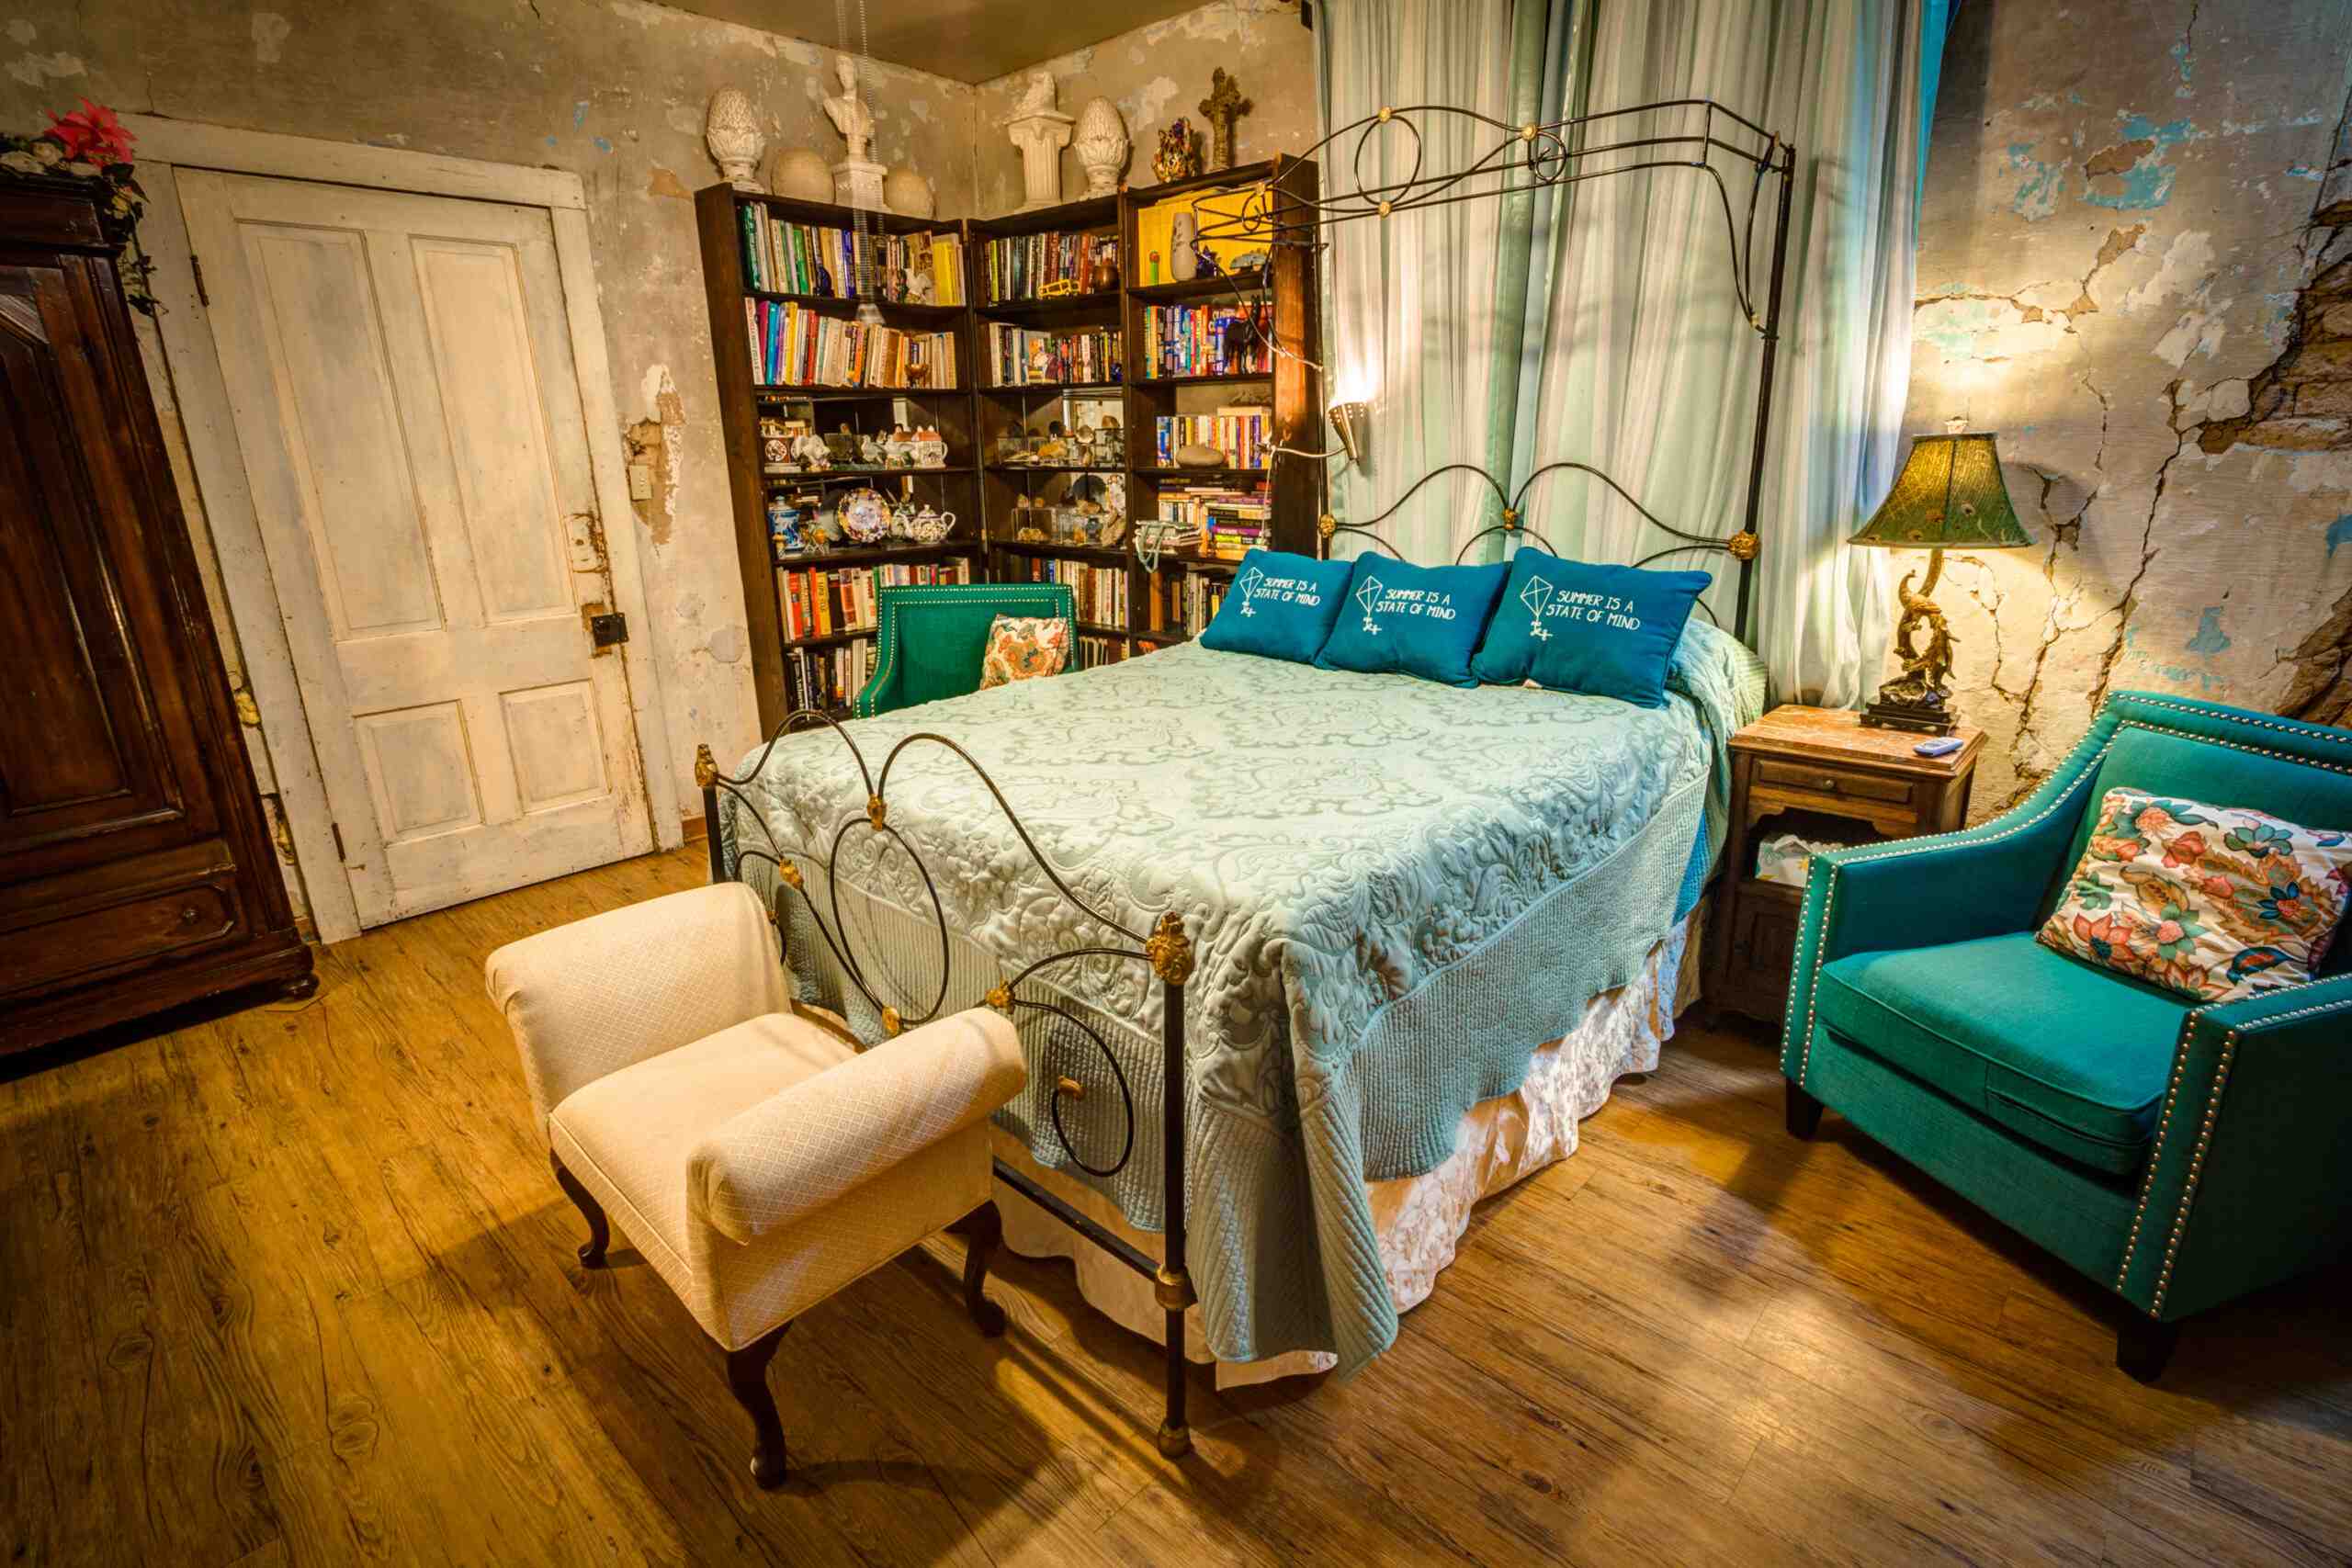 A bed with light blue sheets